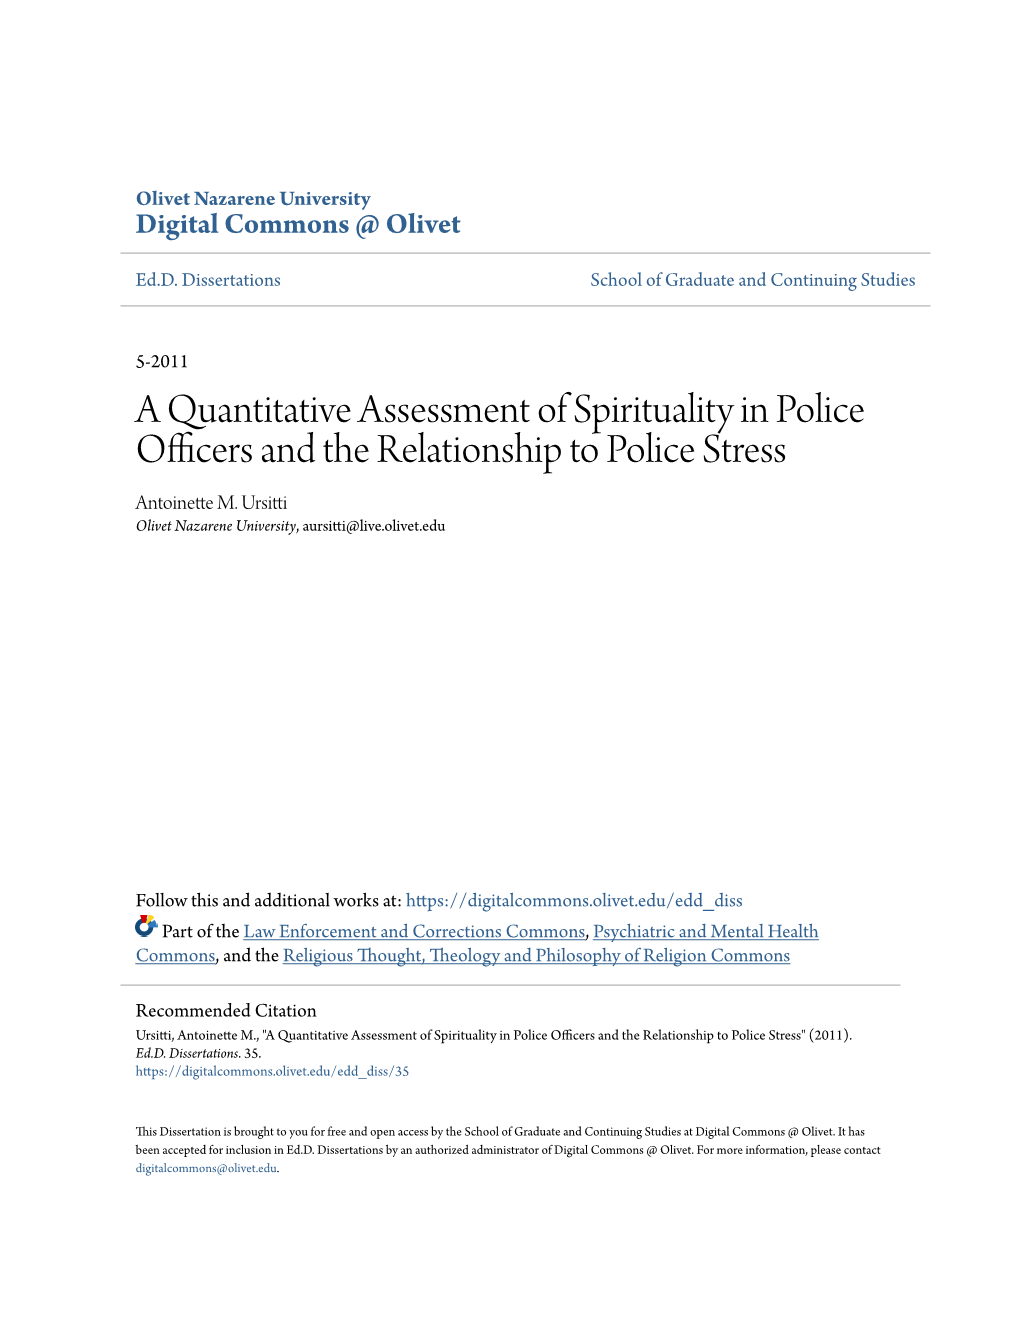 A Quantitative Assessment of Spirituality in Police Officers and the Relationship to Police Stress Antoinette M